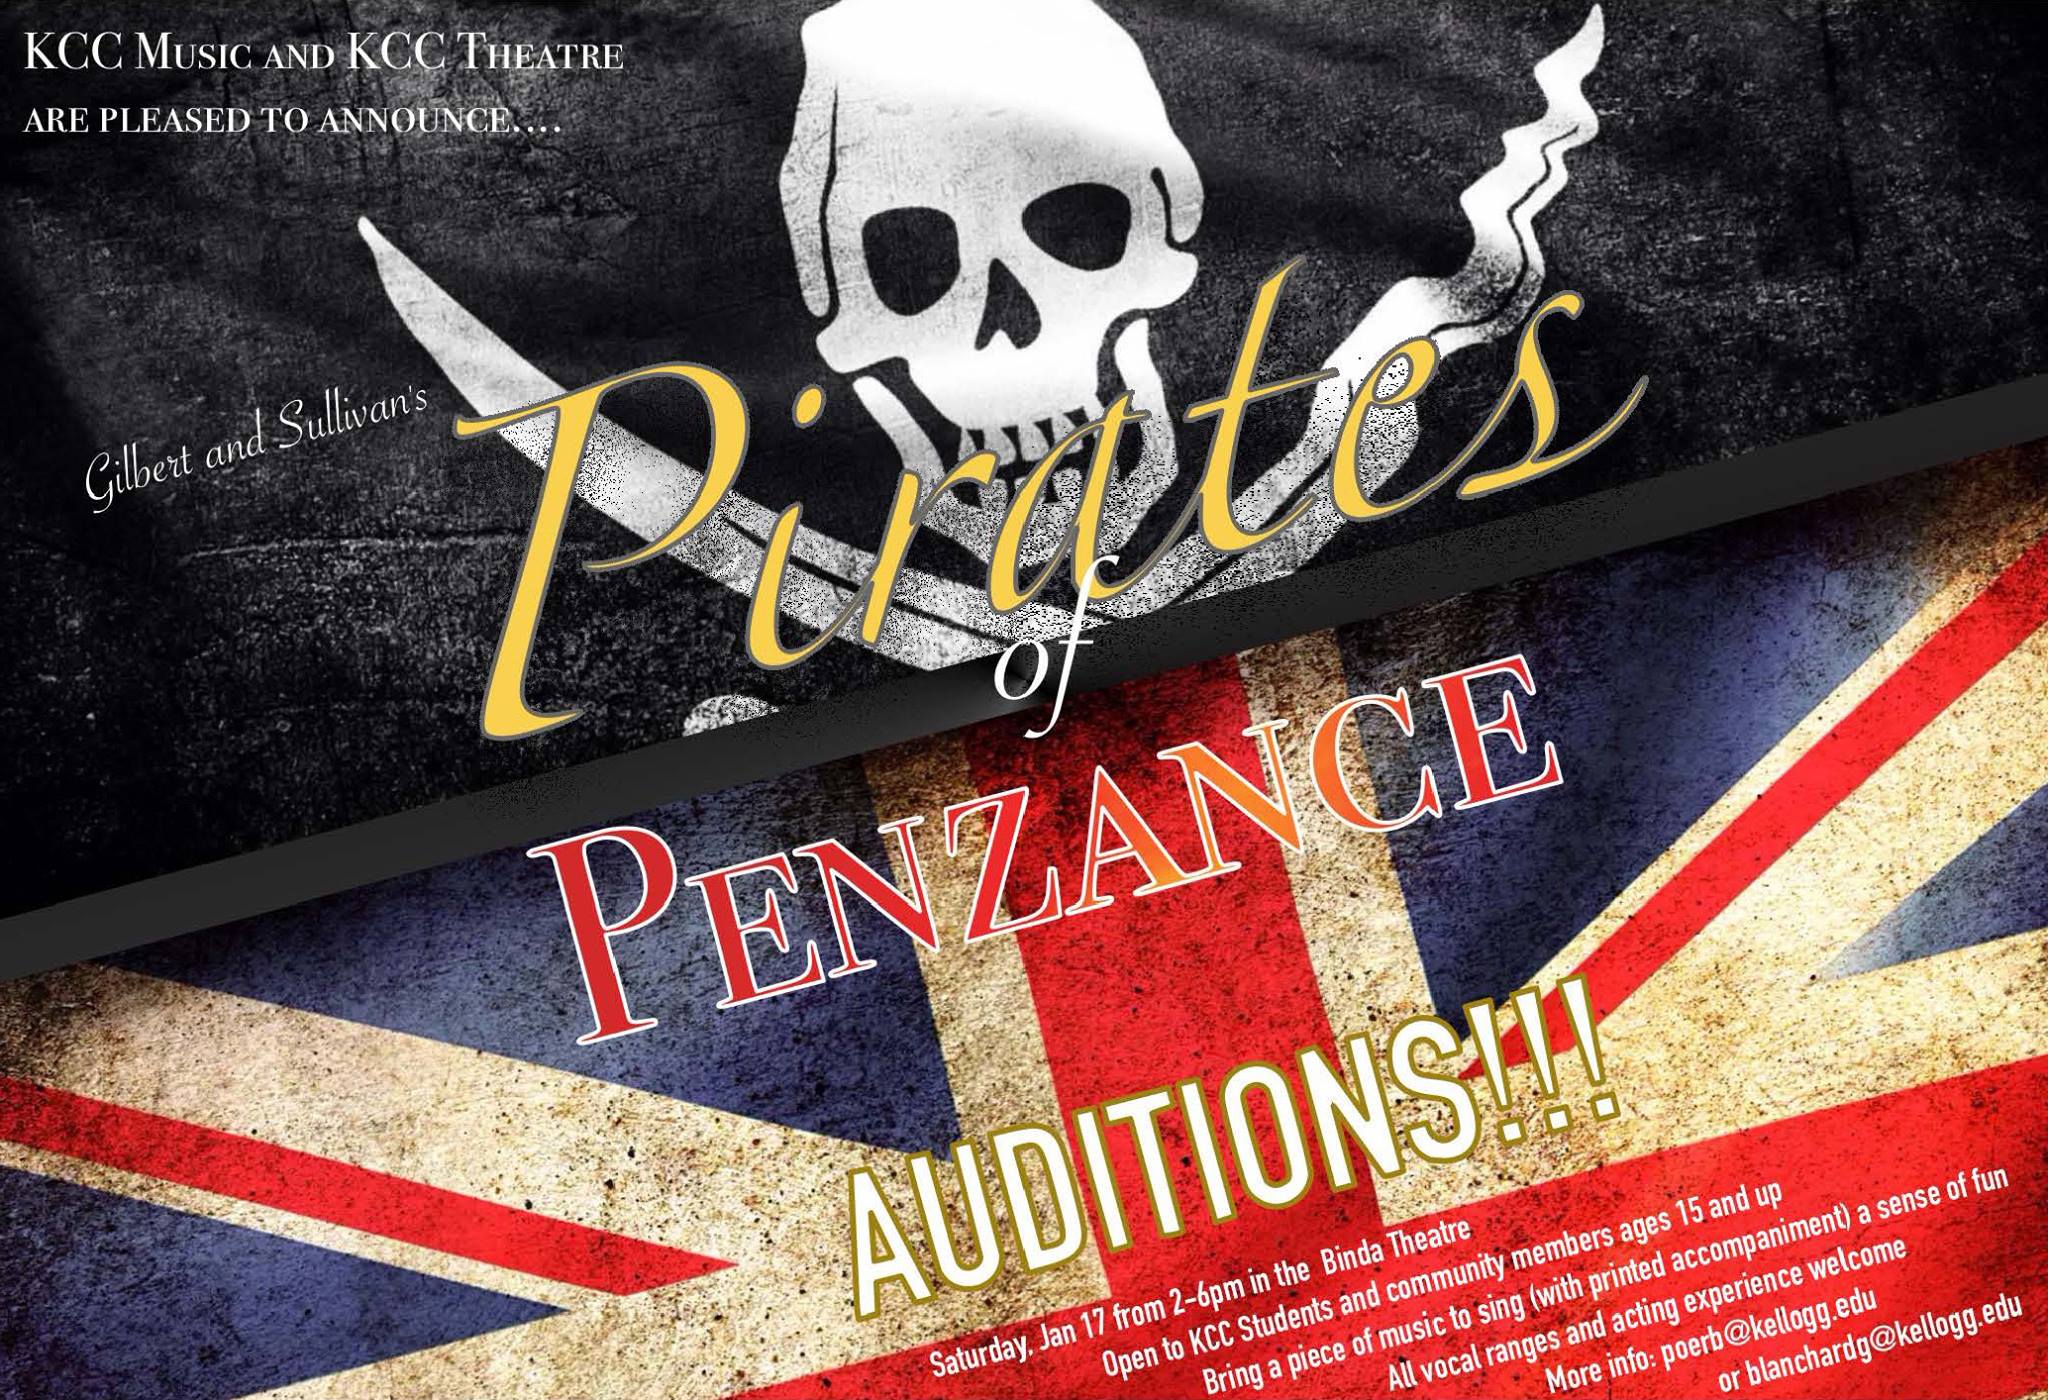 Slide graphics with a skull and crossbones promoting auditions for "Pirates of Penzance"